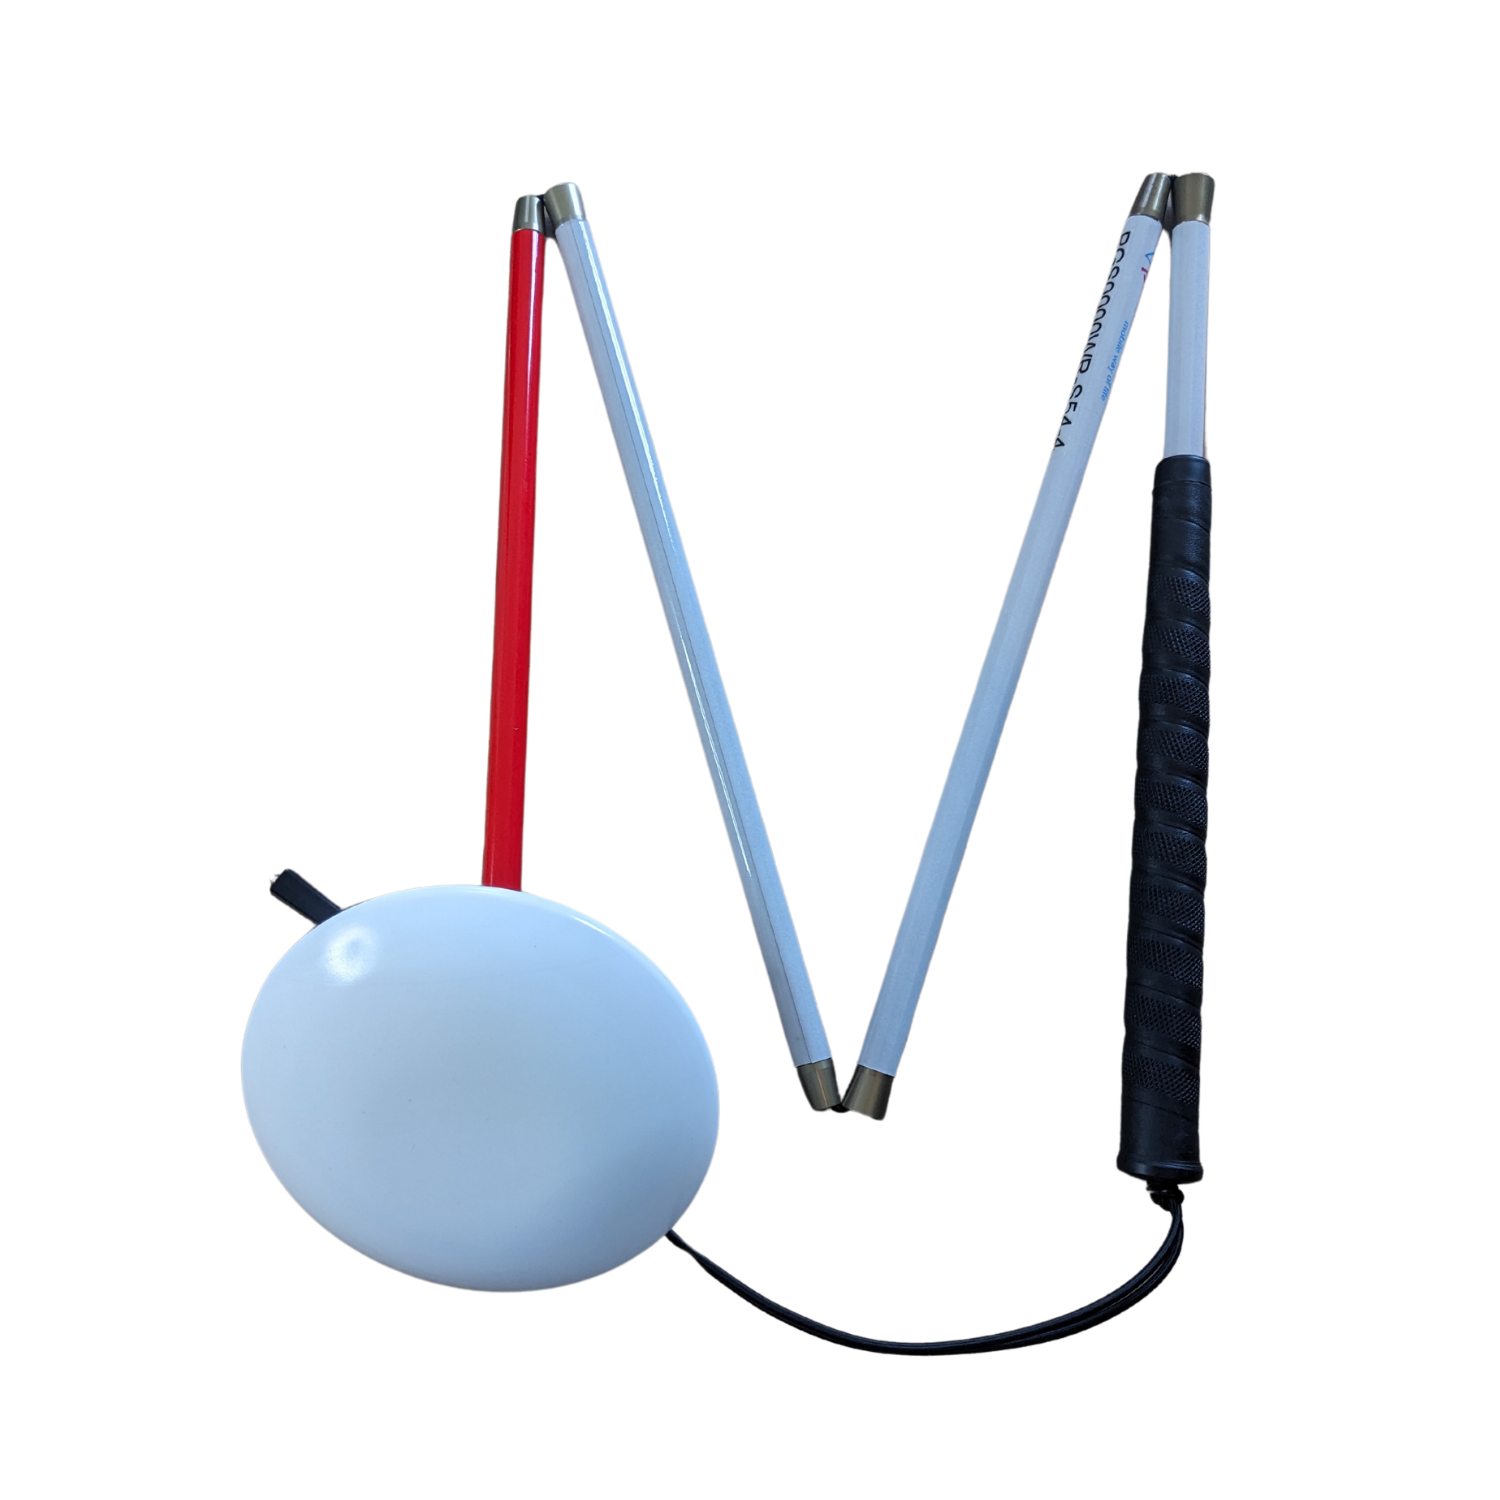 Image of Ambutech's graphite mobility white cane with the dakota disk tip.